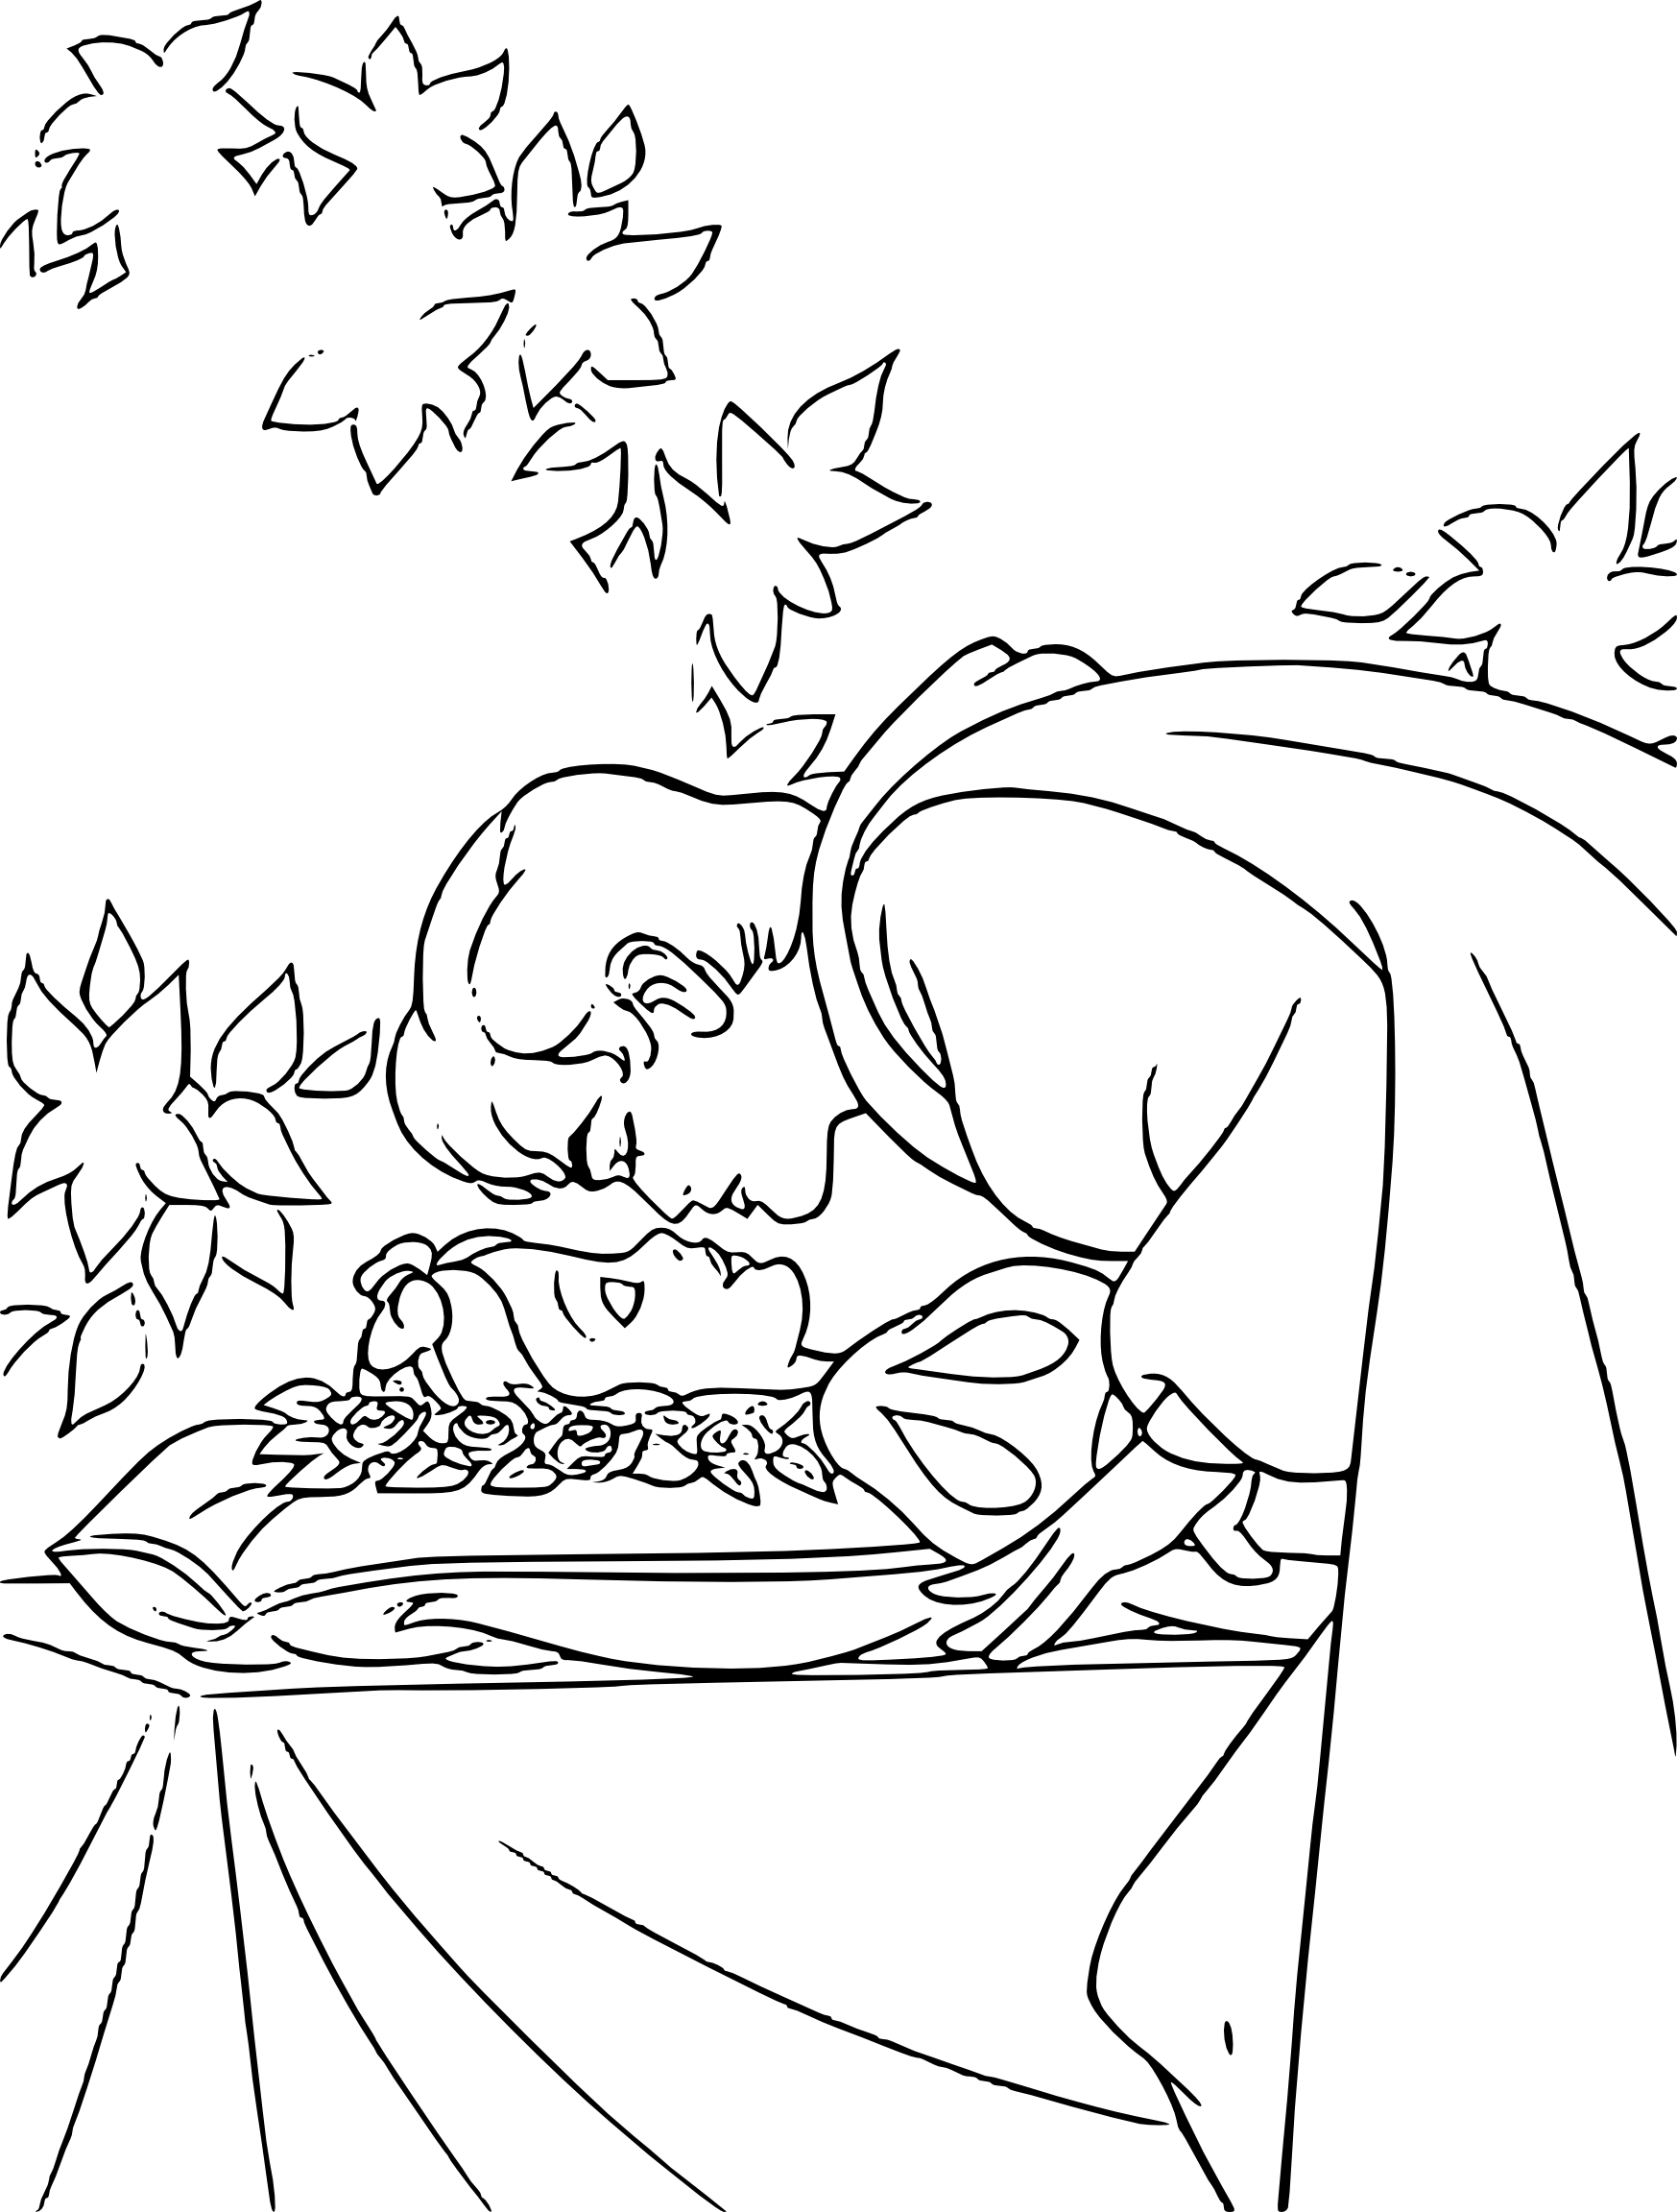 Of Snow White The Kiss coloring page